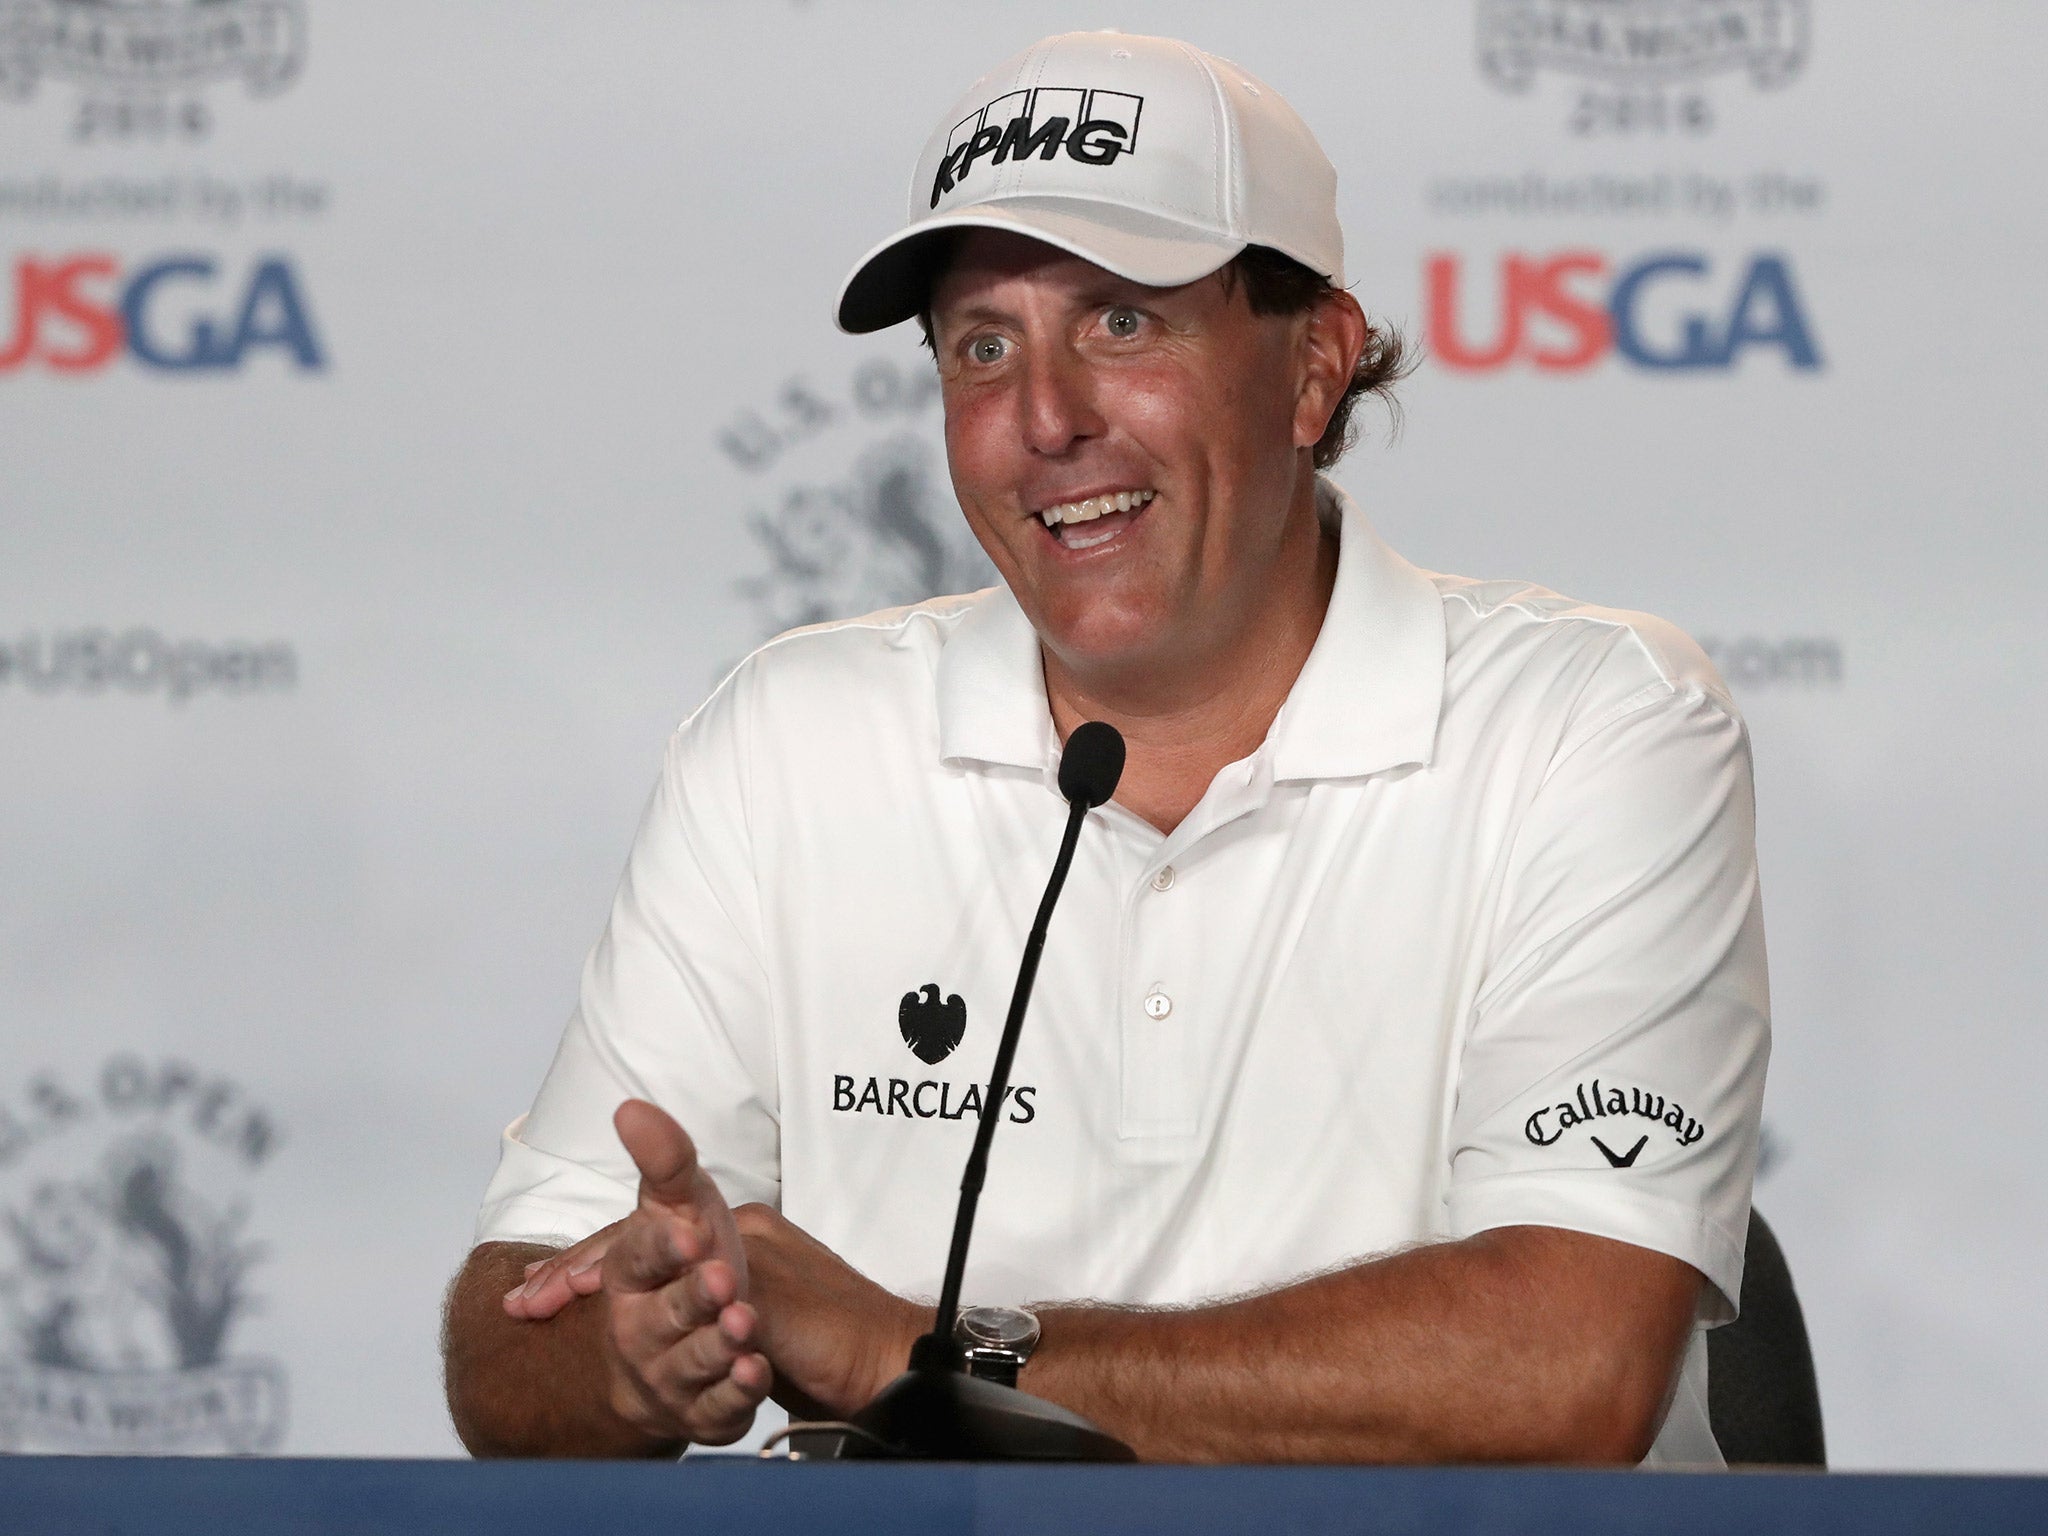 Phil Mickelson is hoping to complete a career grand slam by winning the US Open